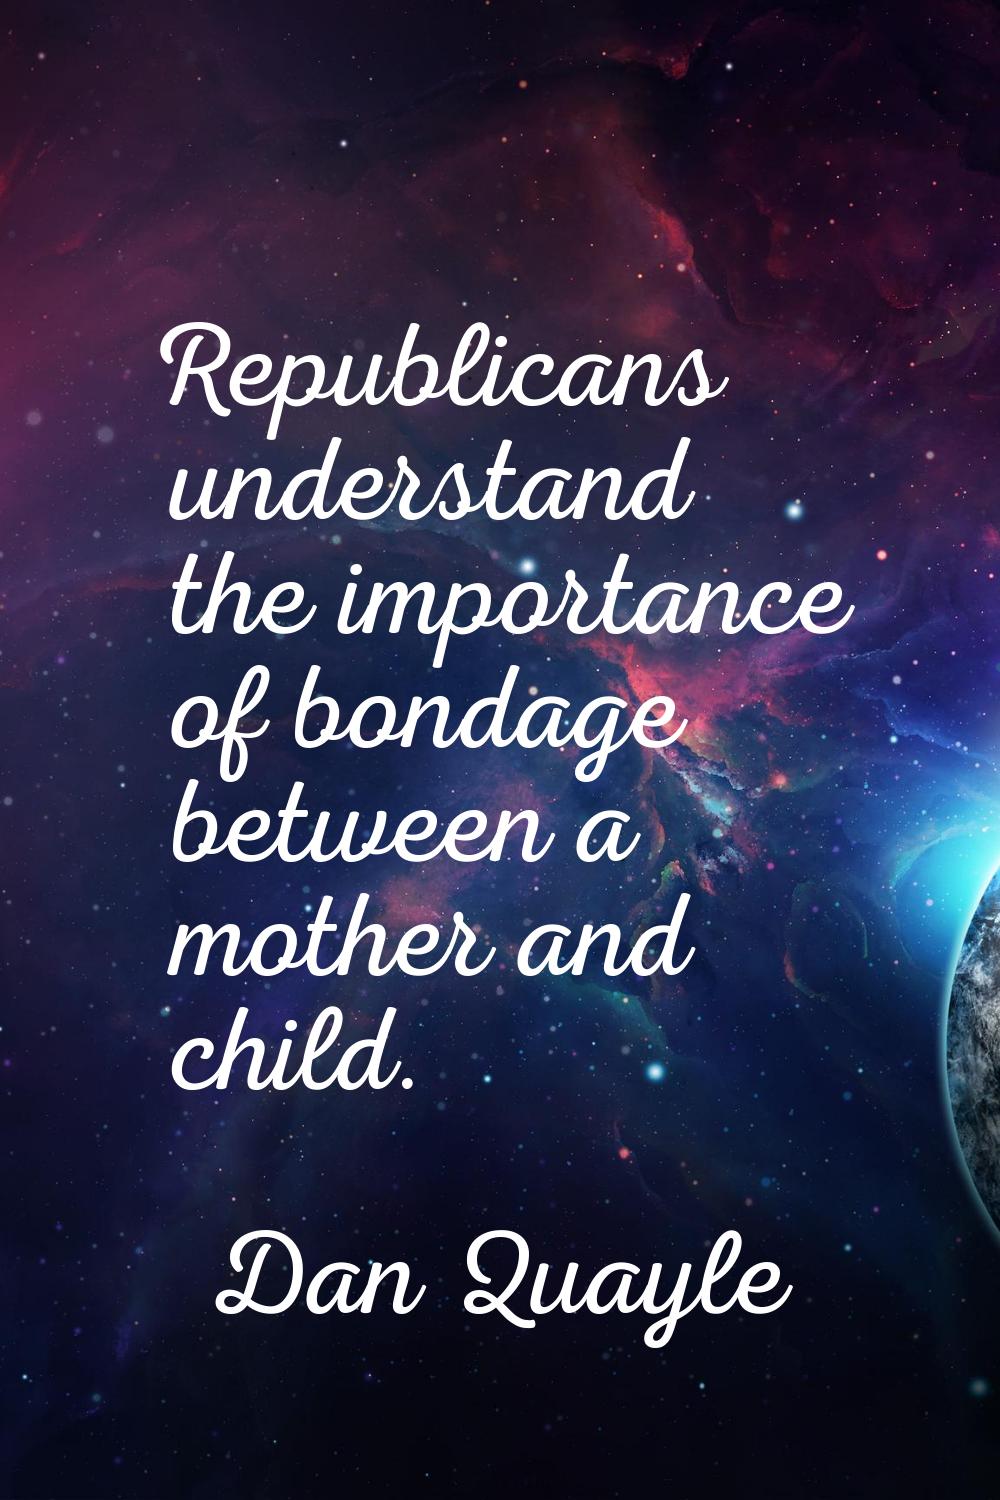 Republicans understand the importance of bondage between a mother and child.